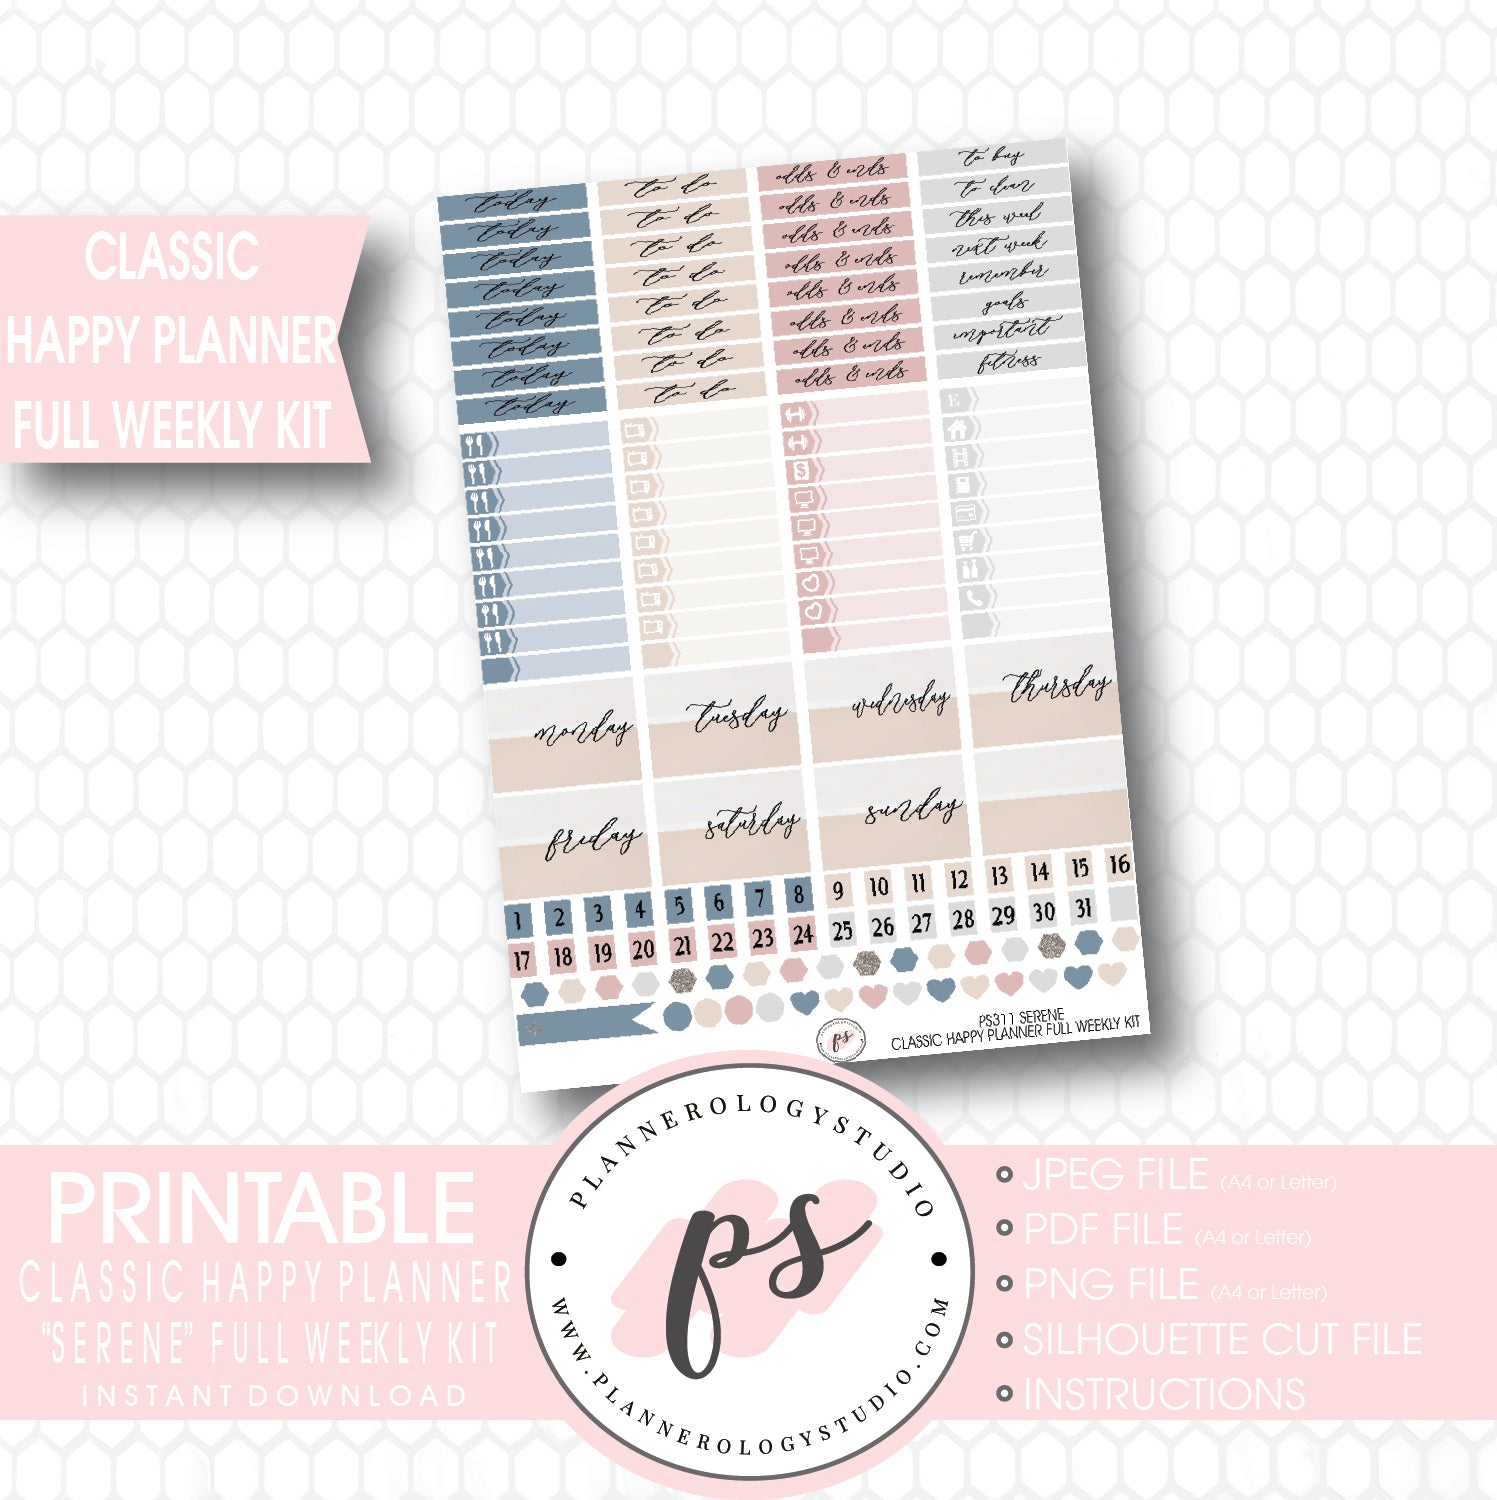 Serene Stock Photography Full Weekly Kit Digital Printable Planner Stickers (for use with Classic Happy Planner) - Plannerologystudio